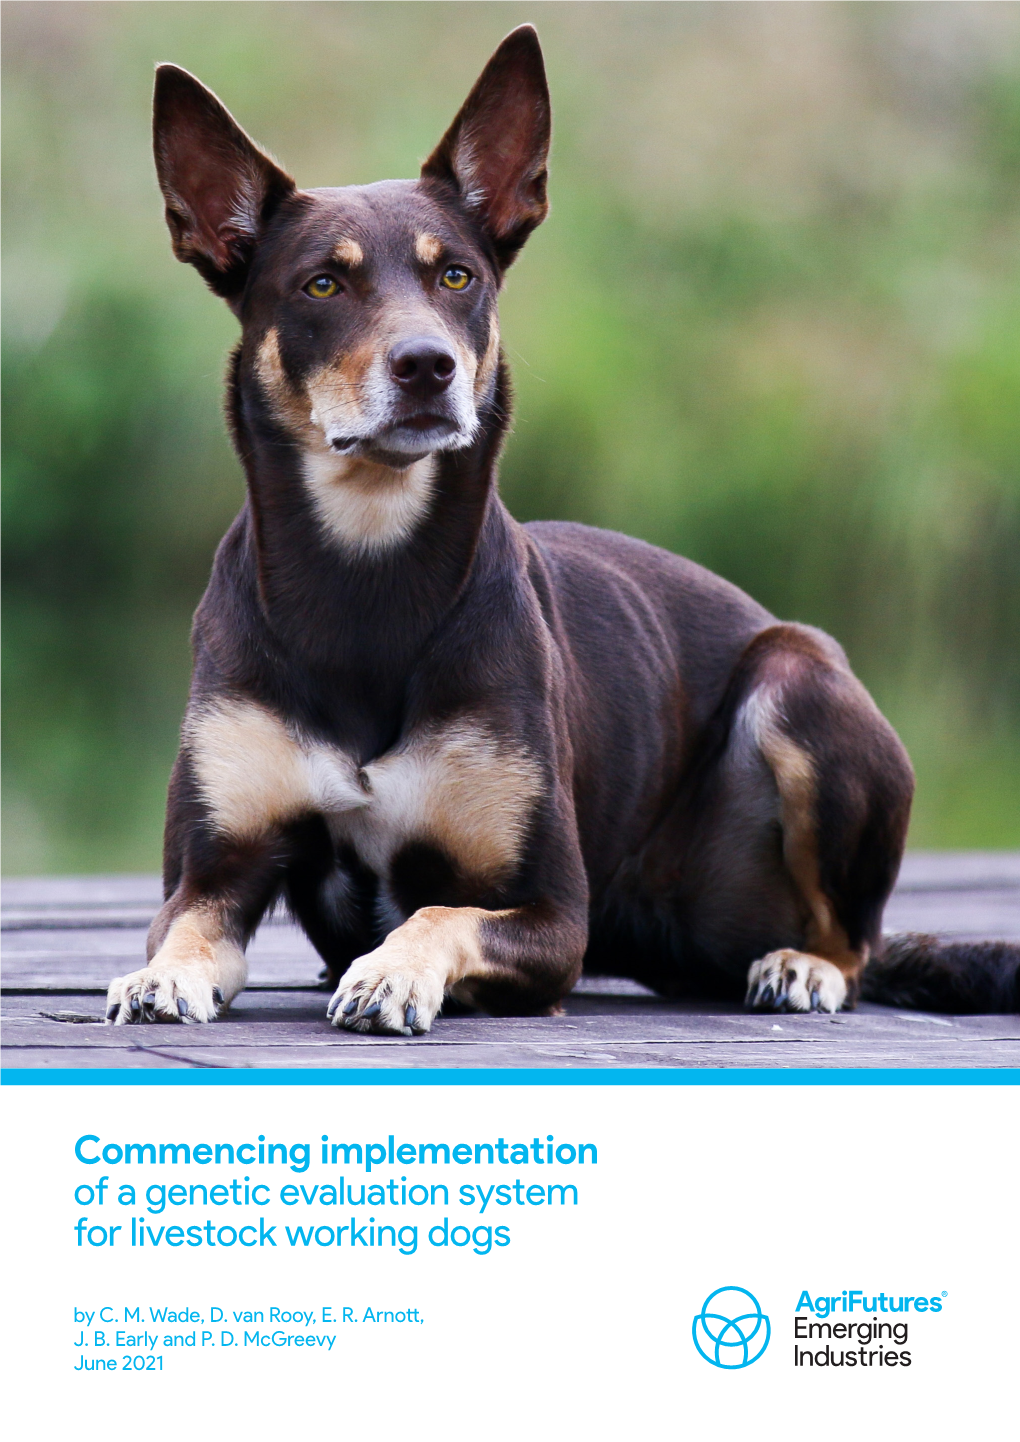 Commencing Implementation of a Genetic Evaluation System for Livestock Working Dogs by C